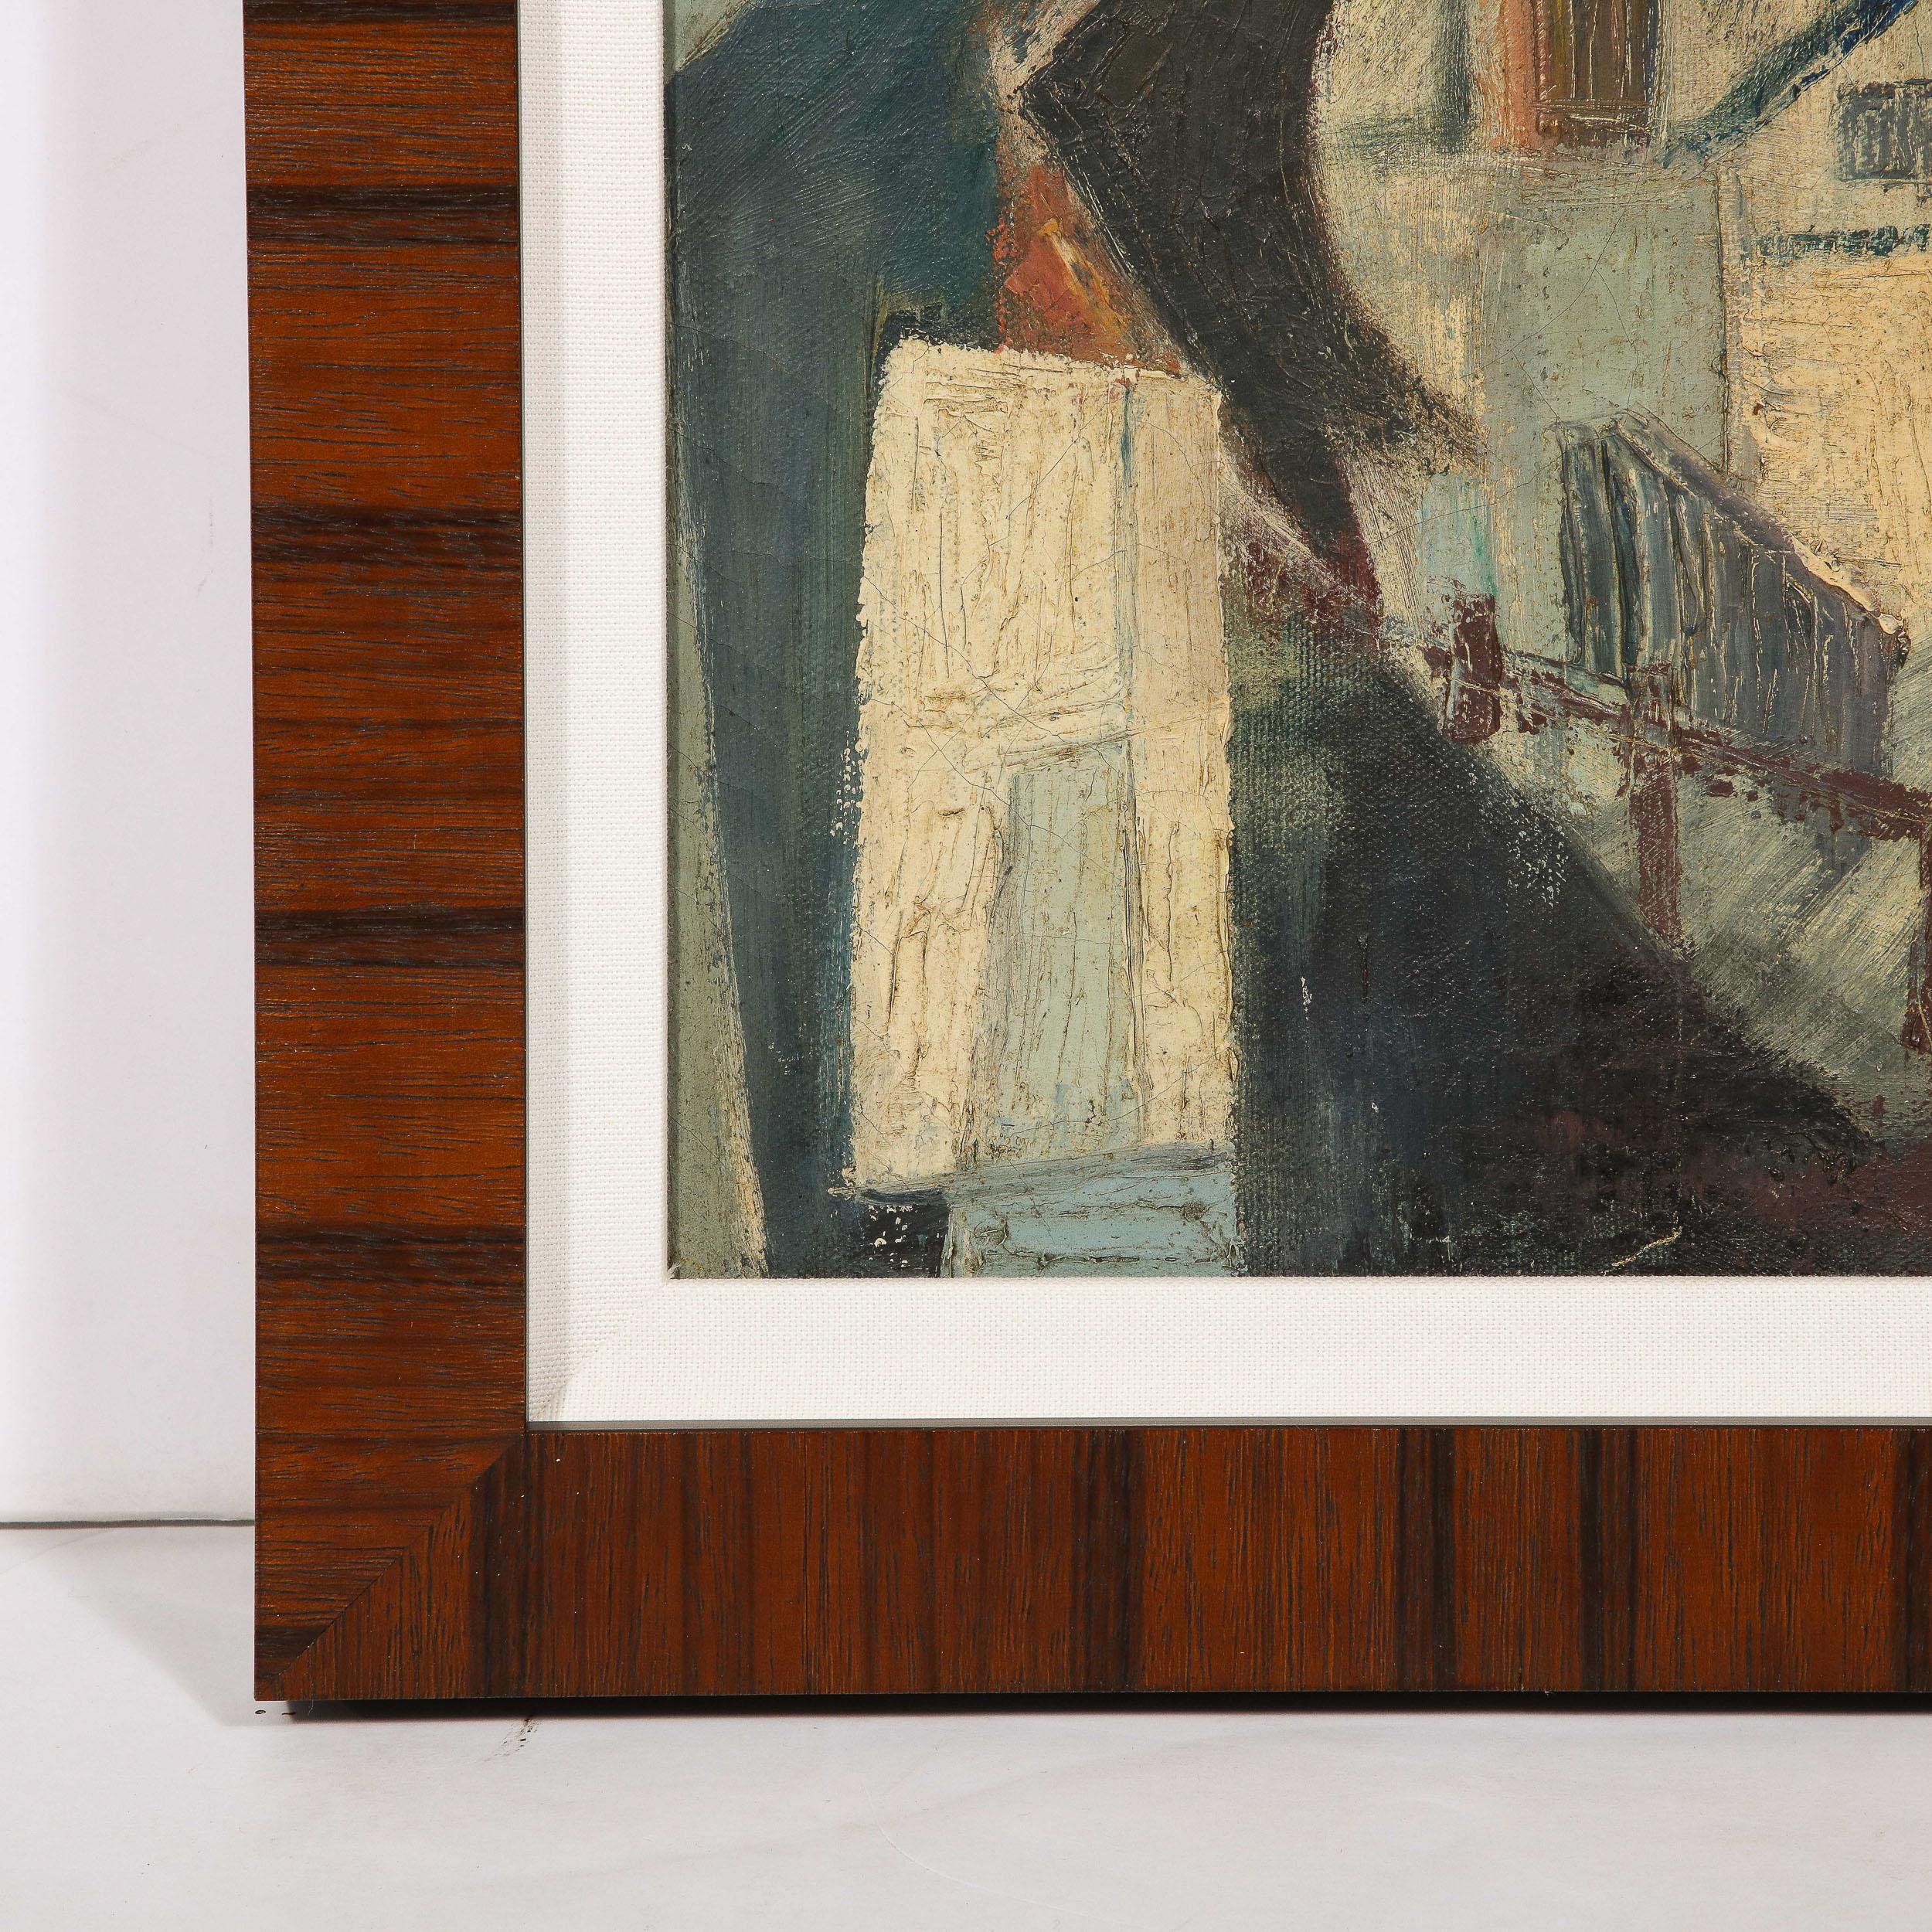 This stunning Mid Century post war modern oil on canvas painting was realized in France circa 1970. Rendered in a cubist style, informed by the early work of Picasso and Braque, the composition offers a flattened perspective depicting a highly